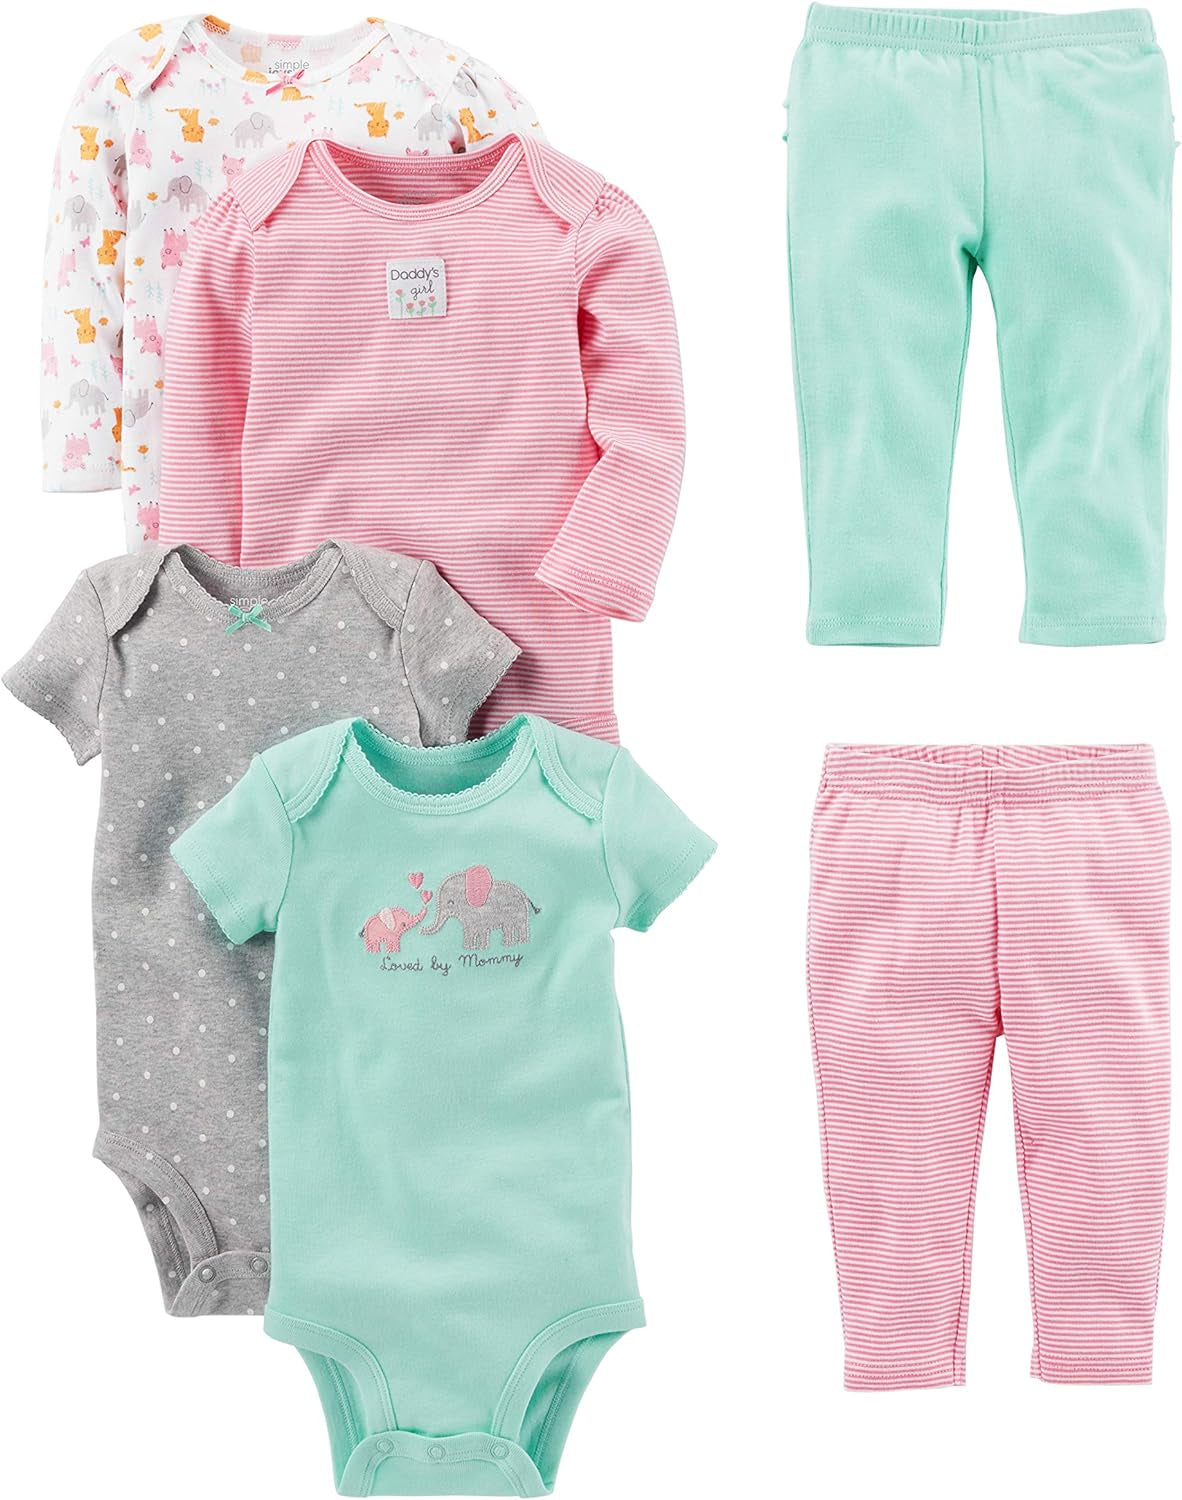 Baby Girls' 6-Piece Bodysuits (Short and Long Sleeve) and Pants Set